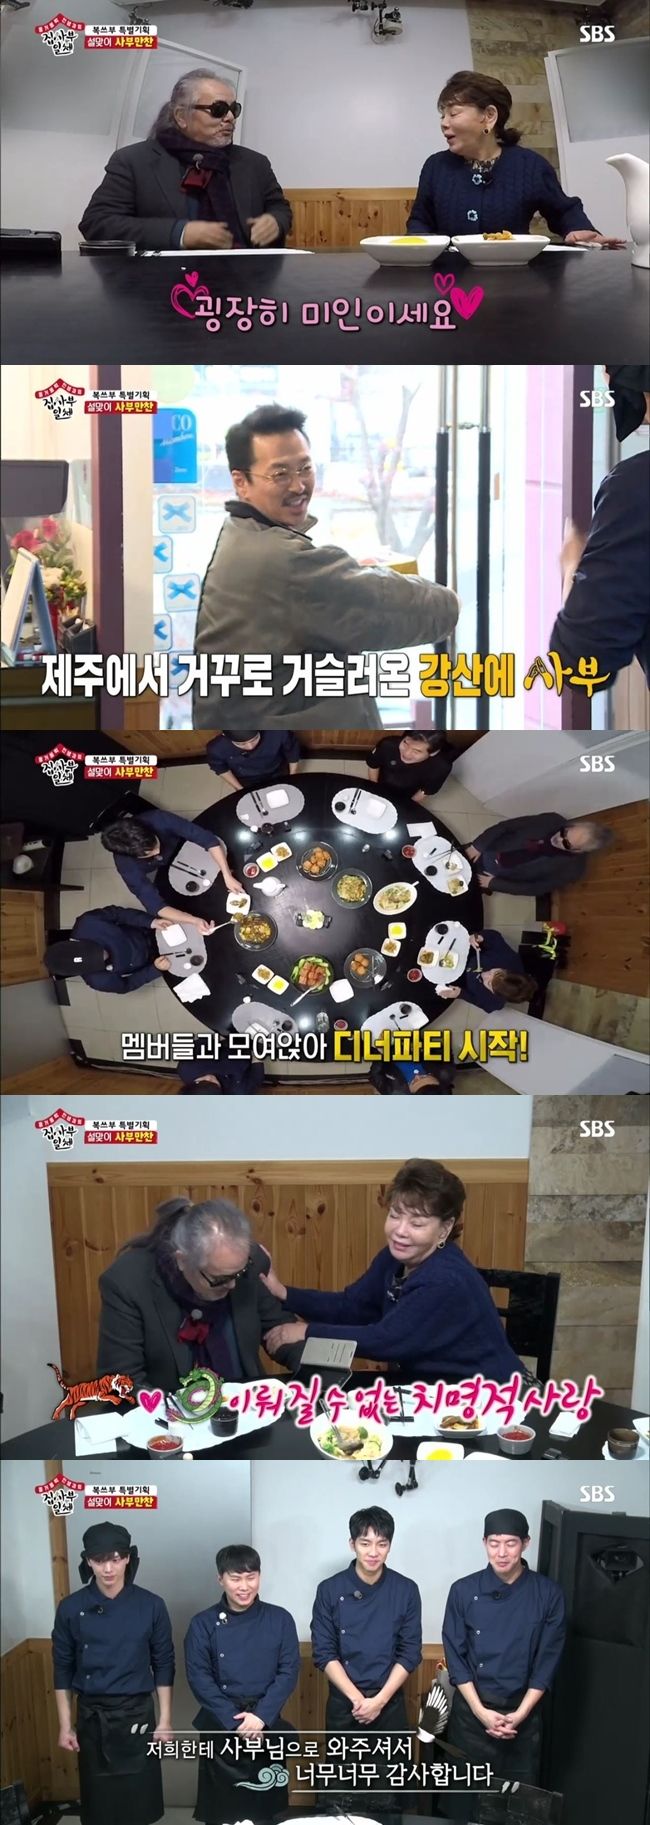 SBS All The Butlers Master Lee Yeon-bok made the hearts of All The Butlers members as well as viewers during the New Year holidays warm with warm hearted foods.According to Nielsen Korea, a ratings agency, SBS All The Butlers, which was broadcast on the 3rd, recorded a target audience rating of 3.5% for 2049 and 7.9% for young viewers aged 20 to 49.The highest audience rating per minute at the moment when Lee Seung-gi became an official lover of chef Lee Yeon-bok soared to 10.5% (second part of the metropolitan area).On this day, Lee Seung-gi, Lee Sang-yoon, Yook Sungjae, and Yang Se-hyeong invited the previous masters, Jeon In-kwon, Kim Soo-mi, and Kangsan, to the house of Lee Yeon-bok, After that, he was drawn to select the official disciple of Boktsubu.There was an awkward silence between Jeon In-kwon and Kim Soo-mi, who met for the first time on this day, as the masters dinner started at the restaurant of Lee Yeon-bok.While the members were not sure what to do with the two masters in one space, Jeon In-kwon said to Kim Soo-mi, It is very beautiful, and Kim Soo-mi also gave a good impression, saying, The face is better than the screen.Jeon In-kwon said, Im just shaking in my stomach, Im so pretty, he said, I resemble my mother. He made an unexpected affectionate sabous village atmosphere and embarrassed everyone.Jeon In-kwon and Kim Soo-mi were tasting Menbosha made by Yook Sungjae, and they received a call from the members and appeared with a citrus box in Sabu Gangsan, which ran a month in Jeju.The atmosphere of the dinner was even more ripe as the Samcheong-dong Tiger Jeon In-kwon, Yum Dragon Kim Soo-mi, and free Hallabong Hwang Gangsan joined.During the meal, Jeon In-kwon went to the corner and picked up the phone, and Kim Soo-mi laughed as he said, Im not hard.Jeon In-kwon was stunned and blinded.Jeon In-kwon said, It is the ideal person to drag me, and Kim Soo-mi said, I can not, it is complicated if I am now.Jeon In-kwon prepared a lottery for the members and conveyed the warmth of the holiday.Kim Soo-mi delivered handkerchiefs for the mothers of Sung Hyung-jae and his Sumi side dish, and took the members, but Kim Soo-mi, who had a live broadcast, had to leave first.Especially when Jeon In-kwon was sad, Kim Soo-mi laughed, saying, What do you do to go, I will give you a phone number?After the fun game of the members and masters, Lee Yeon-bok invited the rising figure to his house.Lee Yeon-bok revealed a house where three generations lived together, including his wife, daughter, and grandchildren, and was designed and built by discussing with his family. On the first floor, the living room was open with cool glass.The daughter and son-in-law were living on the second floor and Lee Yeon-bok and his wife were living on the third floor.Lee said, I always have friends with my son and son-in-law. Its fun to be with you. Exercise and beer.When the members who visited the Masters Dream House envied, Lee Yeon-bok said, I feel good when I achieve my dreams one by one as I live.If you succeed in earning it, you have to live like this, and you have come to this place as you continue to develop. On the third floor, Lee Yeon-bok shared a space with his wife.Lee Yeon-bok took out the object signed with a wrapping cloth in the safe in the study and said, I will take a few tests and pick up the pupil and give it to you as a certificate.The members burned their enthusiasm, saying, I will never miss this.Lee Yeon-bok confessed, As a cook, what I think is important is the taste. When I was working as a chef of the embassy, I had nose surgery and lost my sense of smell due to sinusitis.In a fatal accident as a chef, he began to manage the taste to compensate for the lost sense of smell.I keep my morning uniform, I quit smoking and I do not drink too much. Lee Yeon-bok suggested, Close your eyes, close your nose, and guess what the ingredients in your mouth are.Lee Seung-gi and Yang Se-hyeong showed off their extraordinary taste, but Lee Sang-yoon and Yook Sungjae were the opposite.Lee Yeon-bok suggested making dumplings together like Chinas snow custom: Today there is special material in dumpling cattle, its something specially put in the snow, he said, bringing in coins.In China, you put jujube, candy, and coins to get lucky; coins give you a prize, especially depending on the amount of money, he said.The Pork Rosso band, Yook Sungjae, had a hint of anticipation for the golden year of the Porko Rosso; the dumplings were completed and the members and Lee Yeon-bok went on a tasting.While the members admired the taste of dumplings, Yook Sungjae took a bite of the first dumplings and noticed.Yook Sungjae said, My master, what was chewed? He picked up a coin from his mouth. The coin in the dumpling was 10 won, and Lee Yeon-bok presented a red envelope saying a prize for 10 won.The members picked dumplings carefully, envious of Yook Sungjae; Yang Se-hyeong, who ate them, applauded and danced.But the real lucky star was also Yook Sungjae, who said, Im really sorry, brother, this year is more than my Haein.I think its Haein in the Poco Rosso band. The members applauded the luck of Yook Sungjae.Lee Yeon-bok once again presented a red envelope, saying, One person takes two from these many dumplings.Yook Sungjae was delighted and shouted Lee Yeon-bok, meaning this 2nd consecutive blessing; Lee Yeon-bok and the members admired Yook Sungjaes naming sense.The last mission to select the mourner was to make dumplings; the members made dumplings with octopus, a special menu prepared by Lee Yeon-bok in their own style.Lee Yeon-bok invited Kim Poong, Jang Yu-an, and Michelin star chef Wang Chu-seong to evaluate the dumplings of the members.Yang Se-hyeong made fishing fried and dumpling gas, while Lee Seung-gi made a dumpling goal.Both of their food received praise, but Lee Seung-gis dumplings, which made use of the 40-year-old taste, became the final winner.Lee Seung-gi was selected as Lee Yeon-boks favorite and received a Chinese esophagus with Lee Yeon-boks name on it, which was ranked as the best one minute with a 10.5% audience rating per minute.Lee Yeon-bok comforted Yang Se-hyeong, who showed his ability as well as Lee Seung-gi, by presenting his favorite China drink.Lee Seung-gi, who saw this, laughed at the disappointment that he was delighted for a while, saying, It is a drink I really like.All The Butlers is broadcast every Sunday at 6:25 pm.